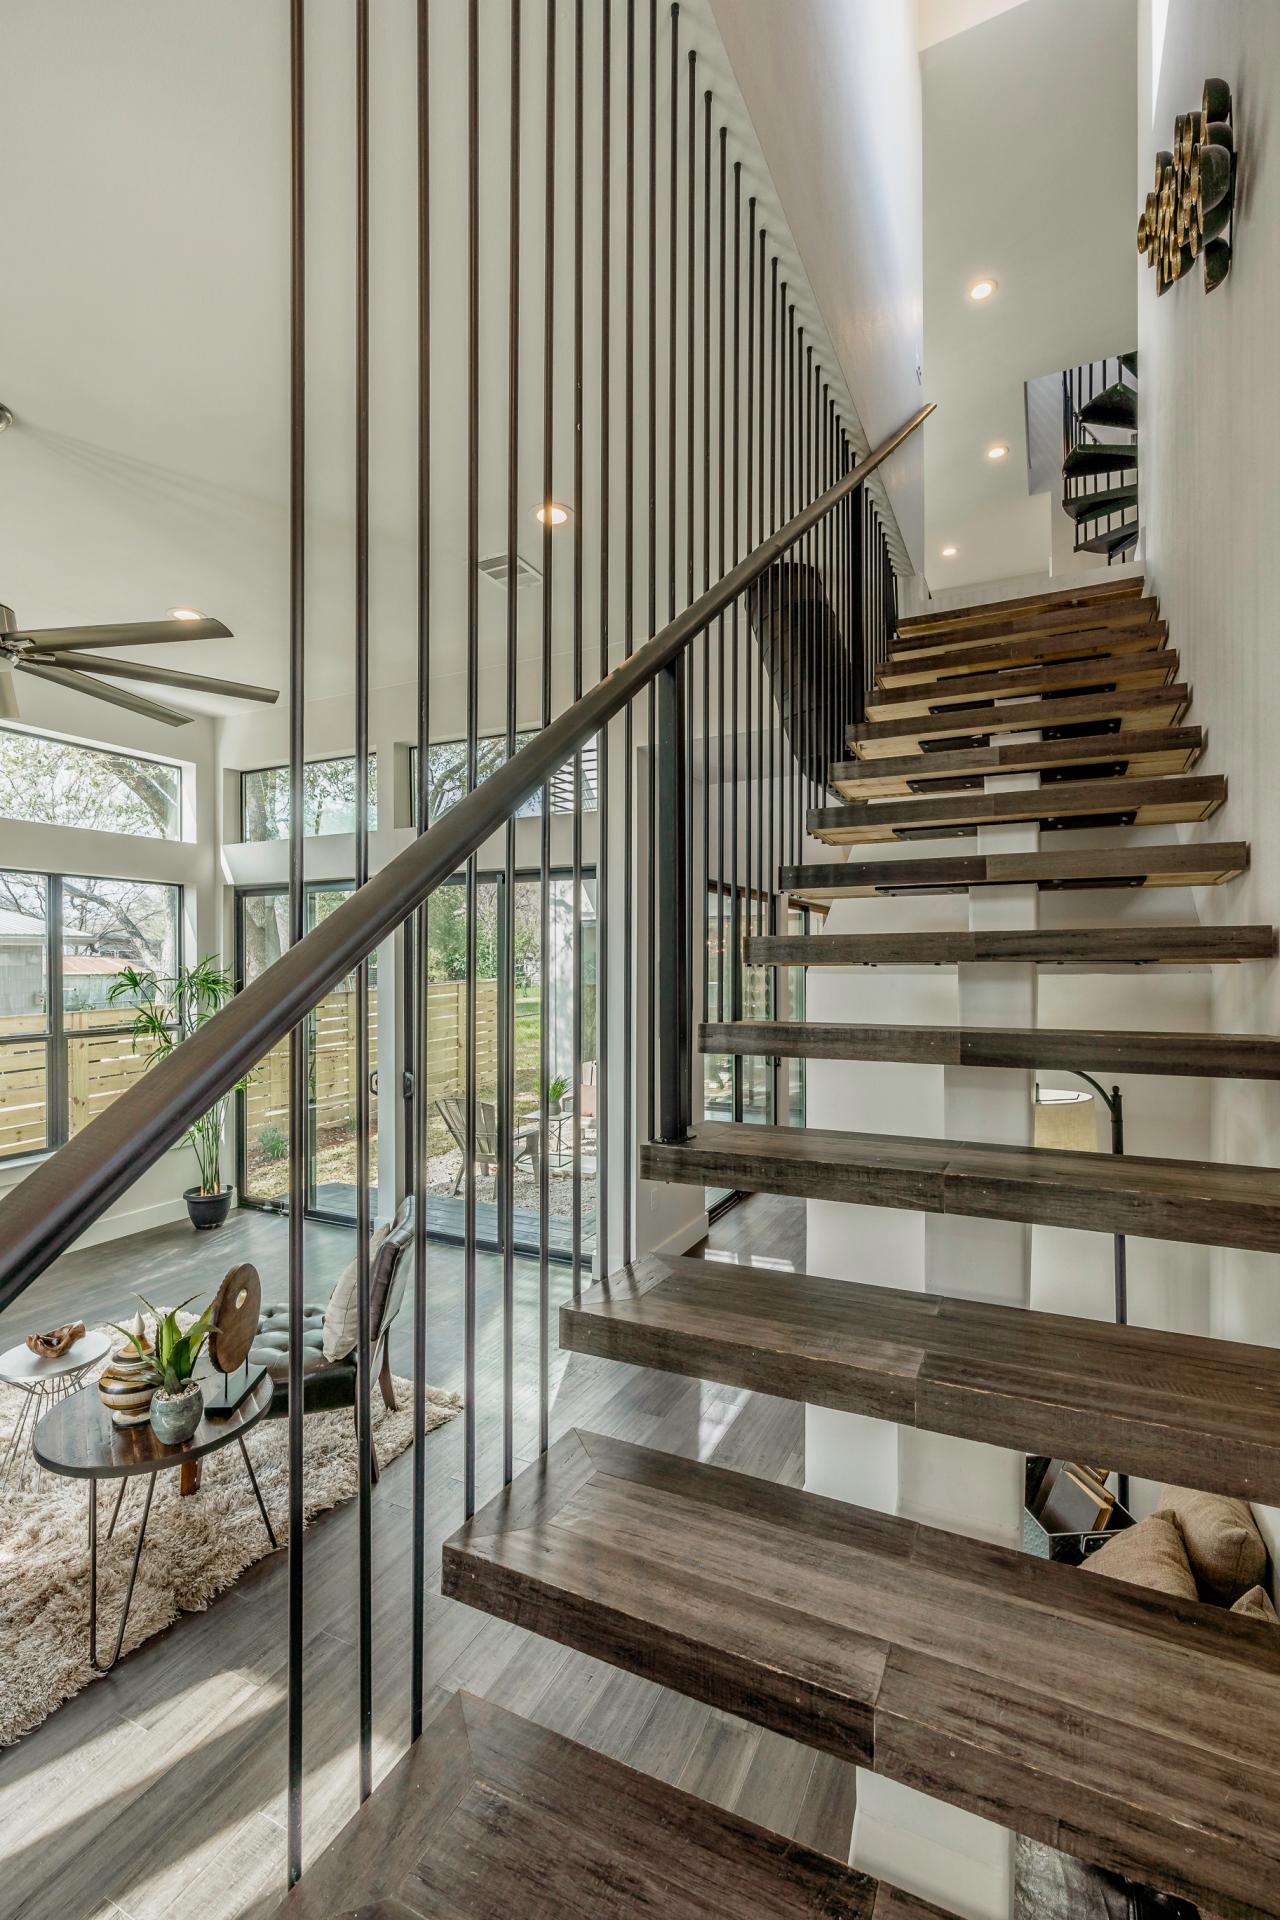 Unique Options for Stair Railing at Home